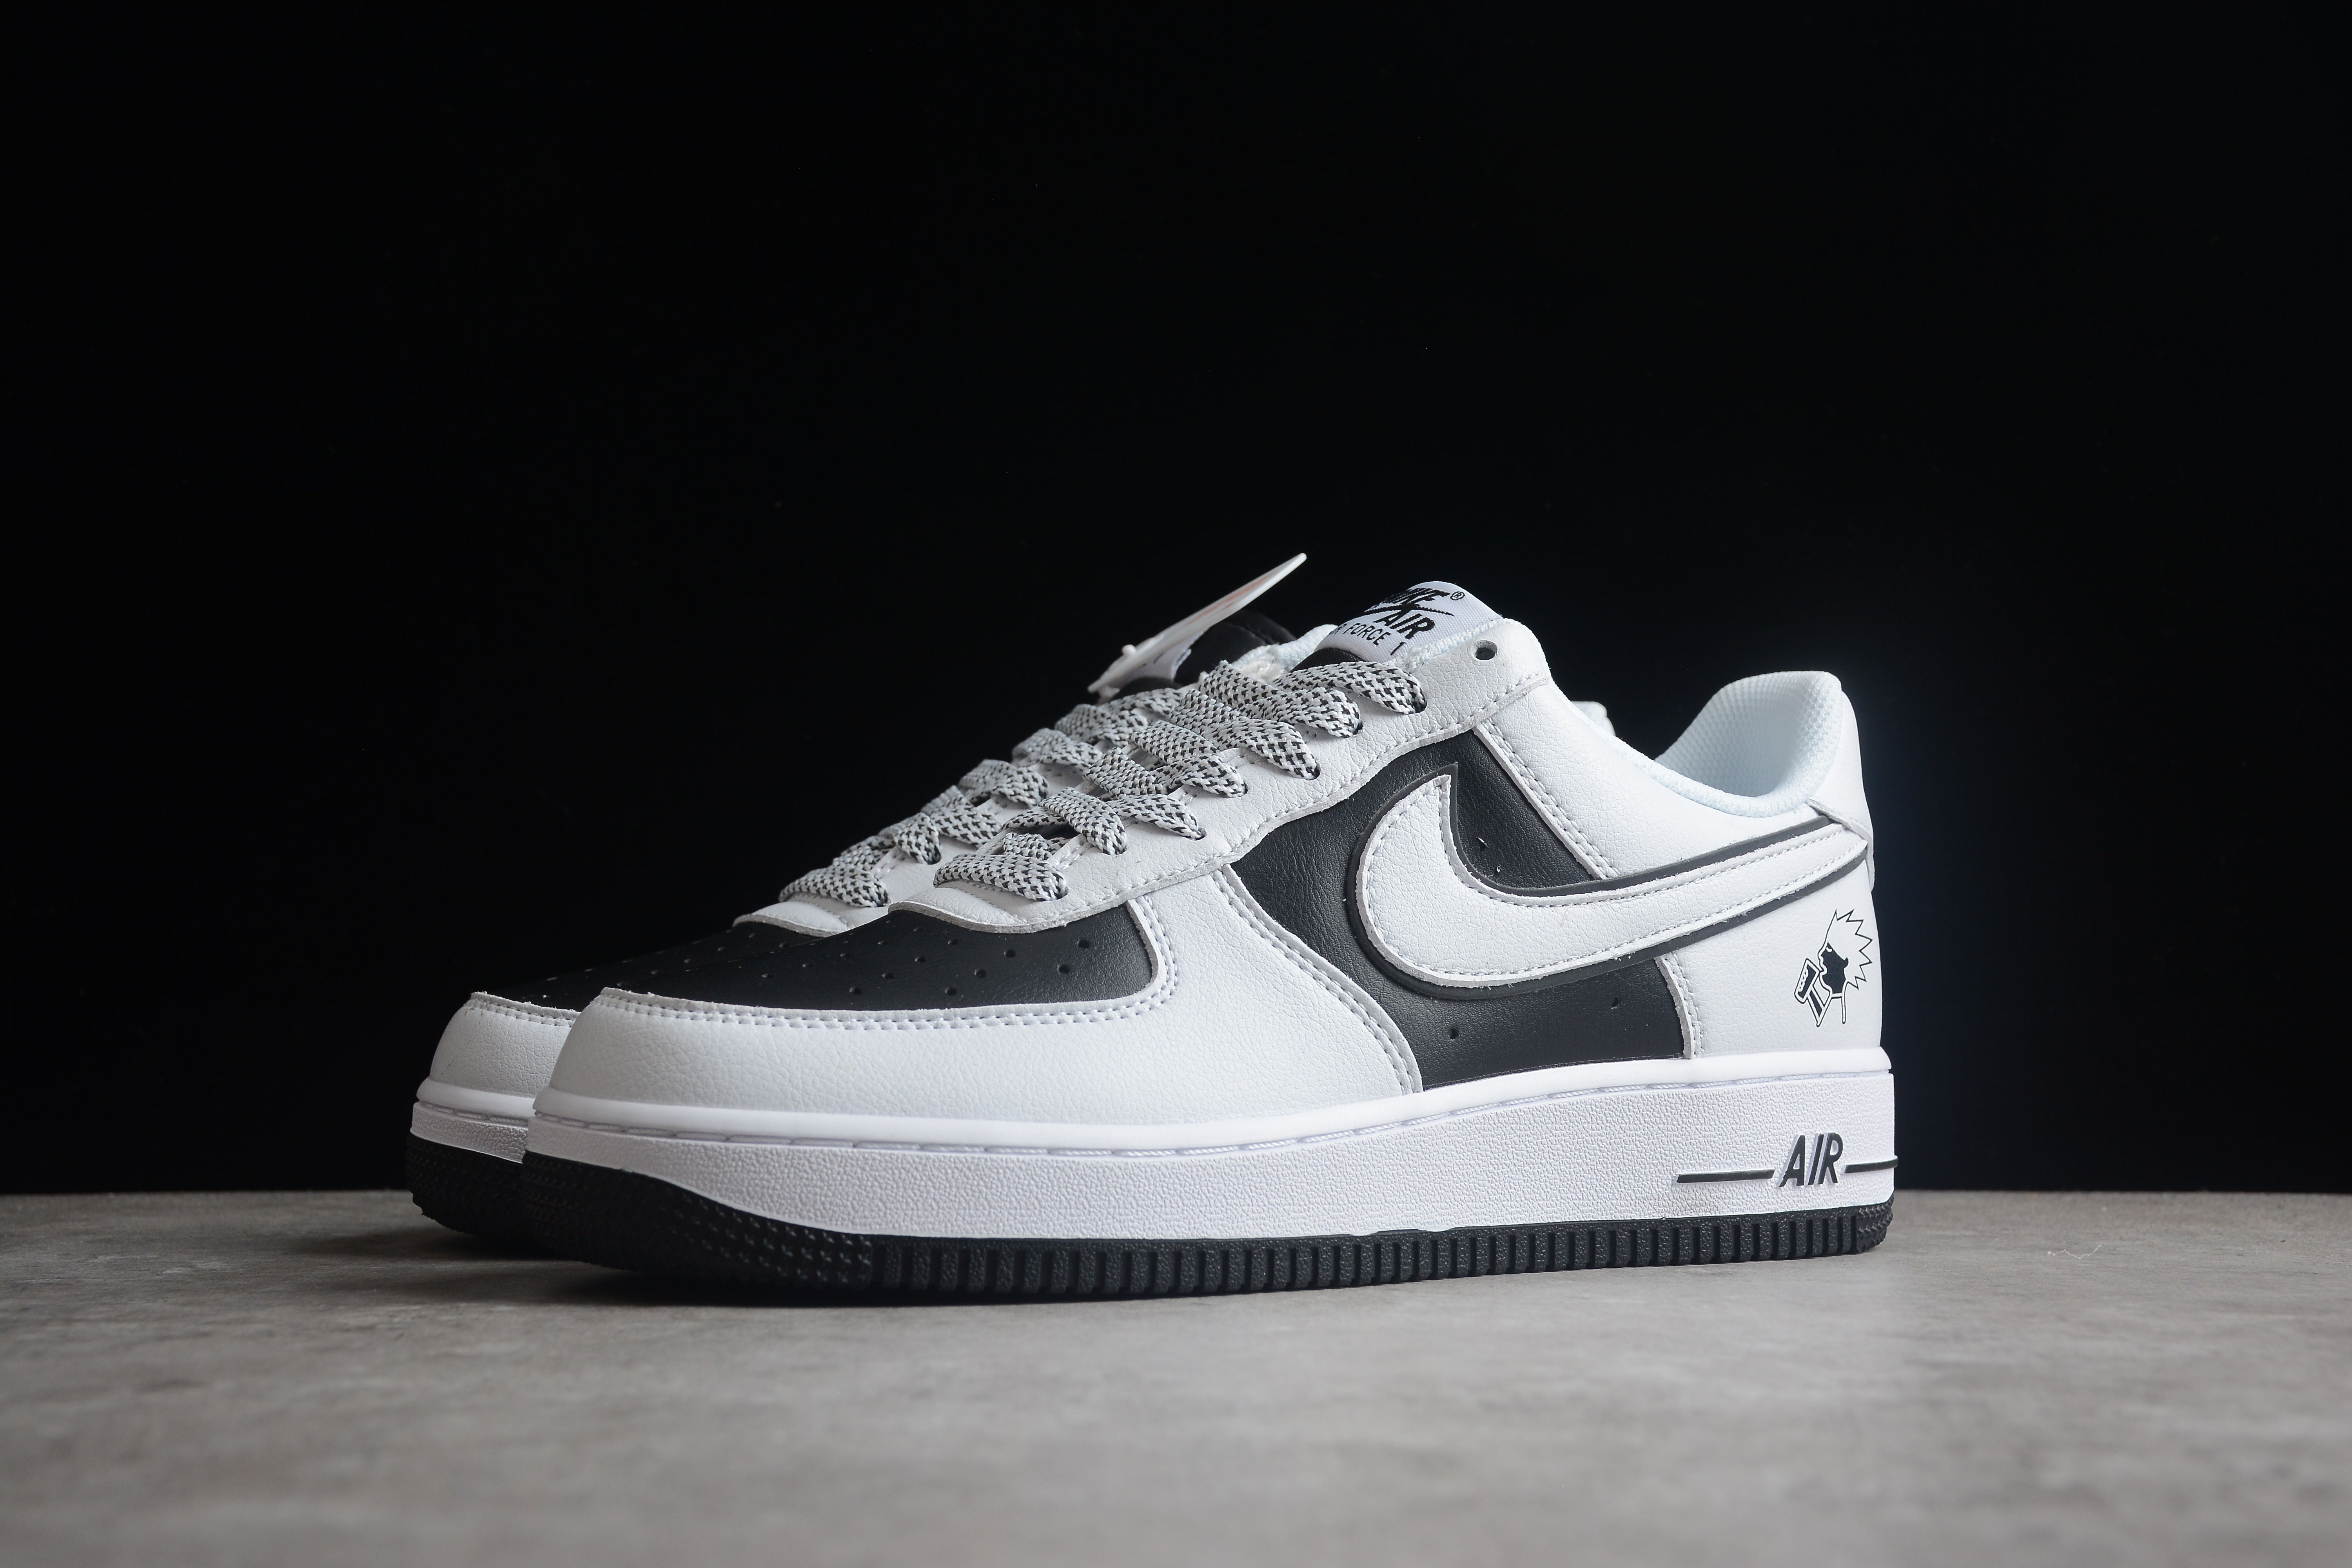 Nike airforce A1 B&W shoes